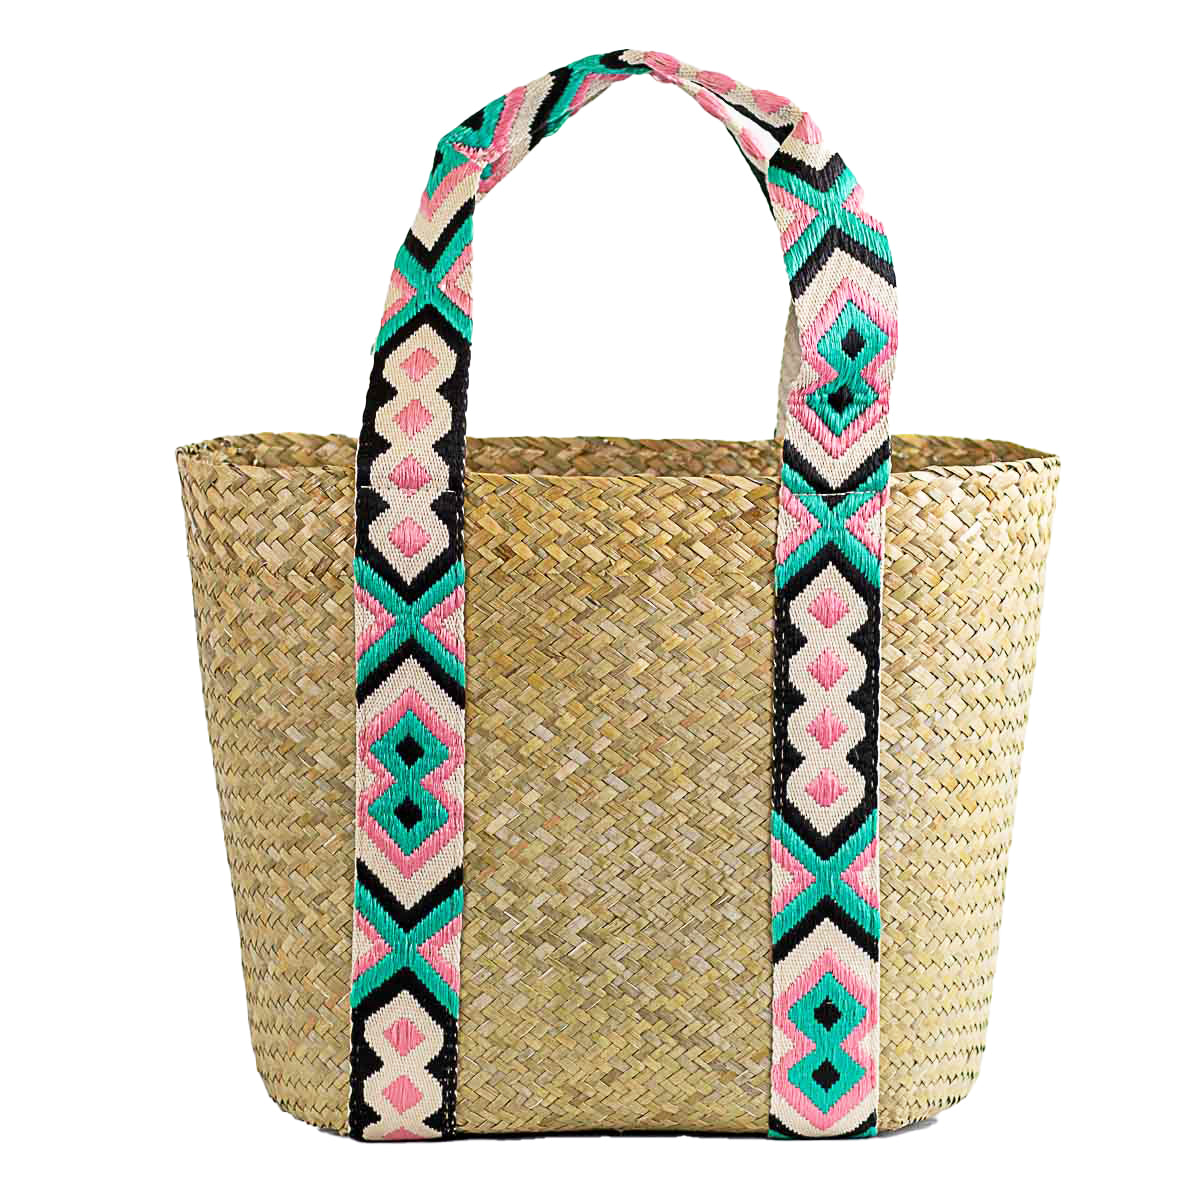 Exuma Straw Tote in Pink & Teal